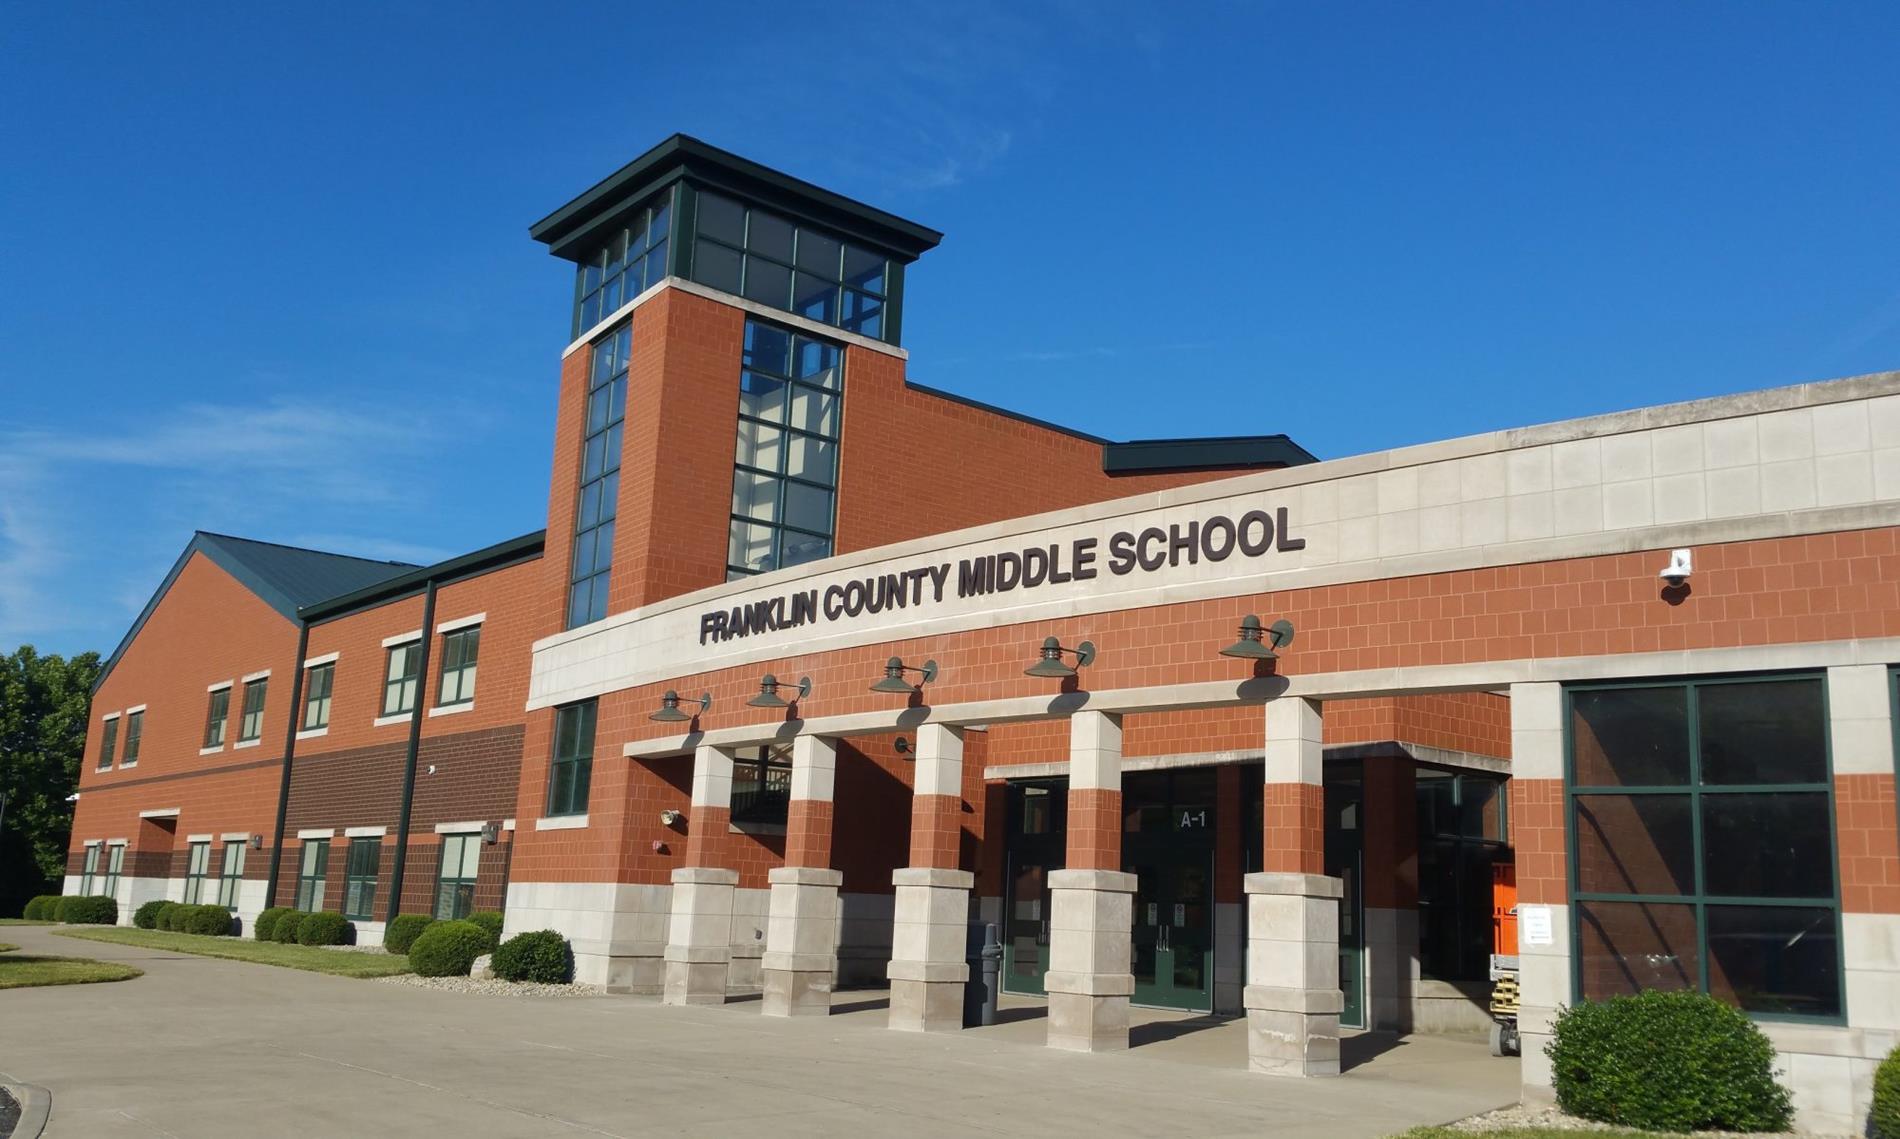 Exterior view of Franklin County Middle School.